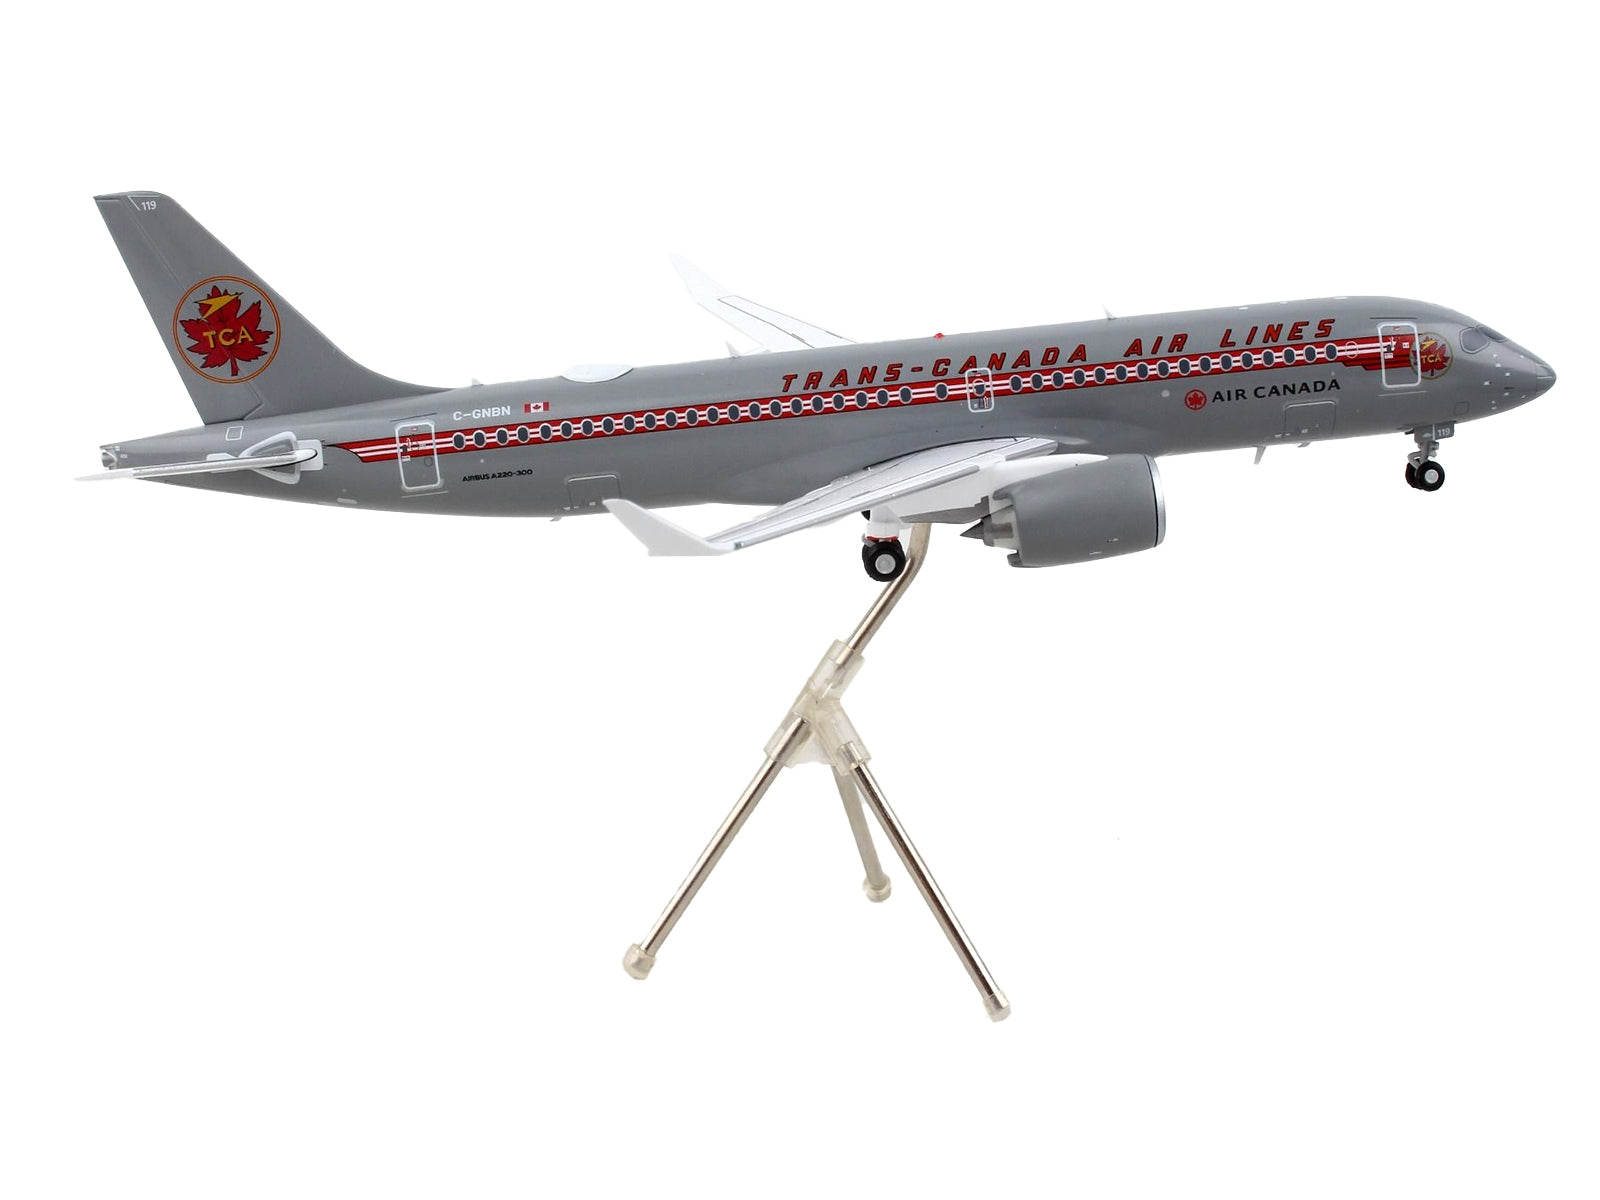 Airbus A220-300 Commercial Aircraft "Trans-Canada Air Lines - Air Canada" Gray with Red Stripes